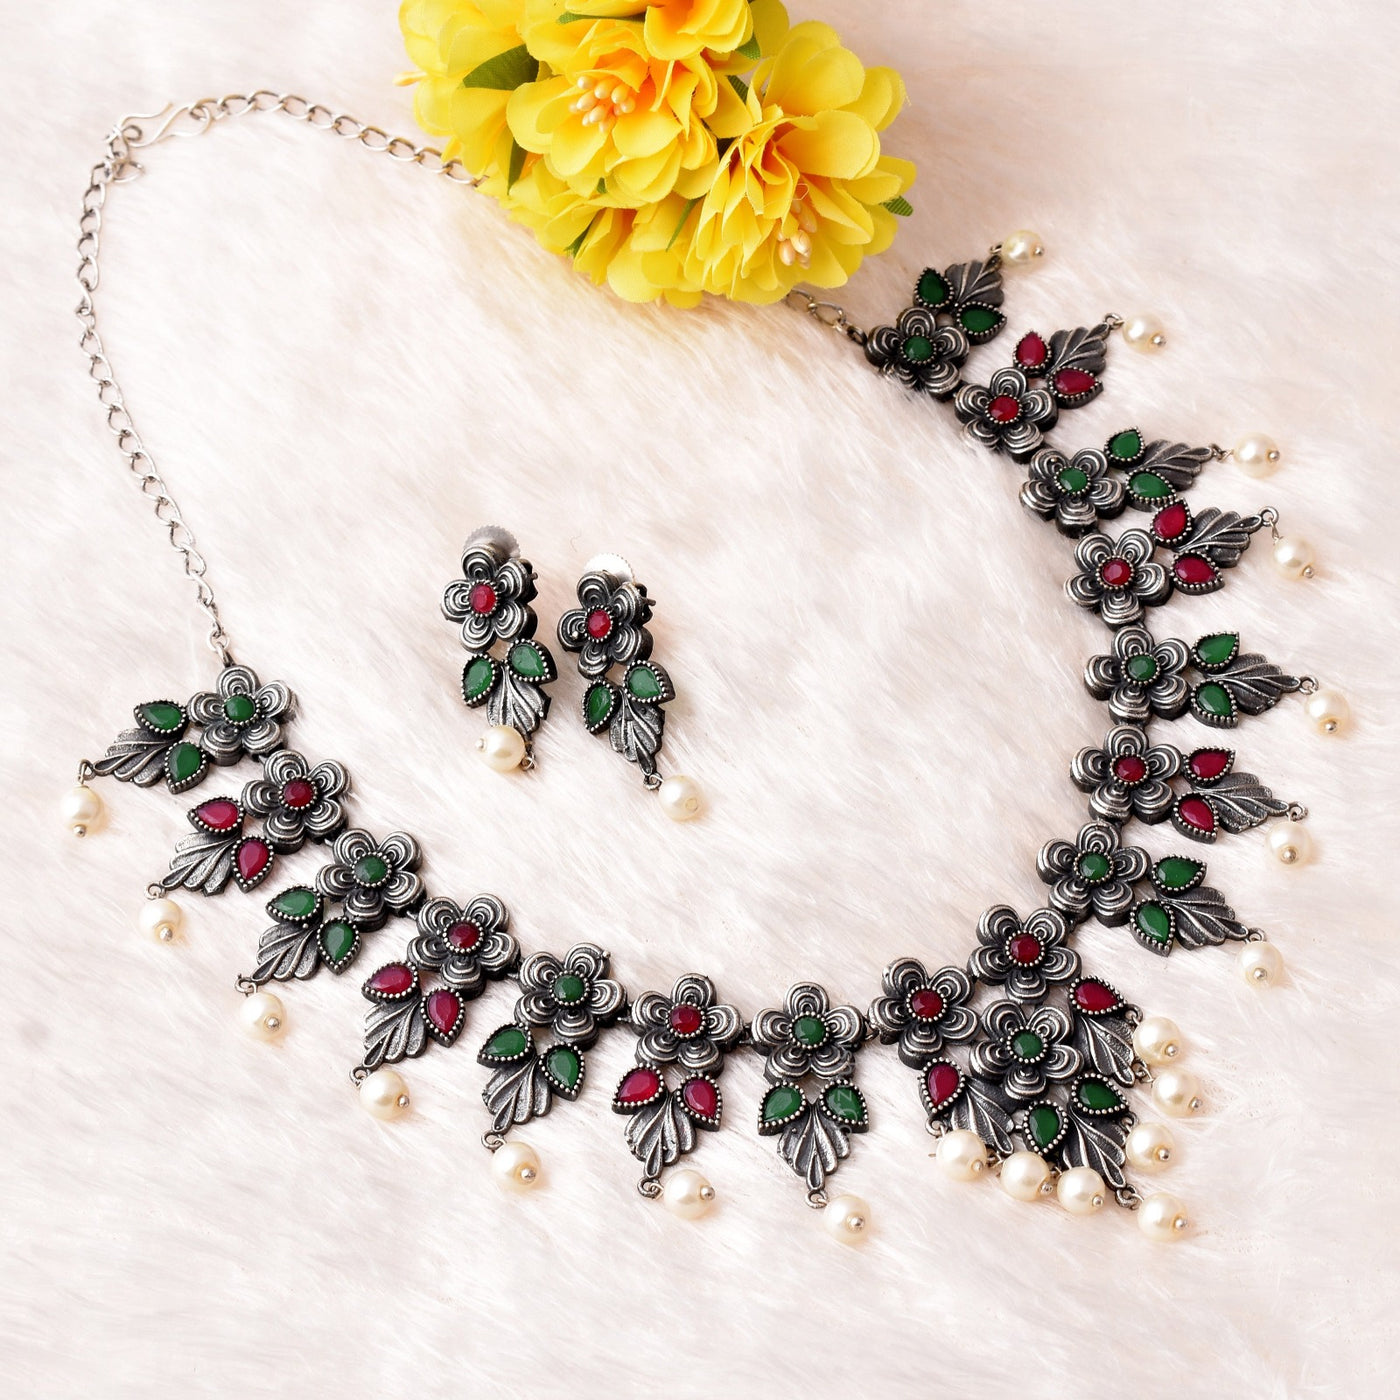 Ruby & Green Color Flower Choker Necklace Set with Matching Earrings